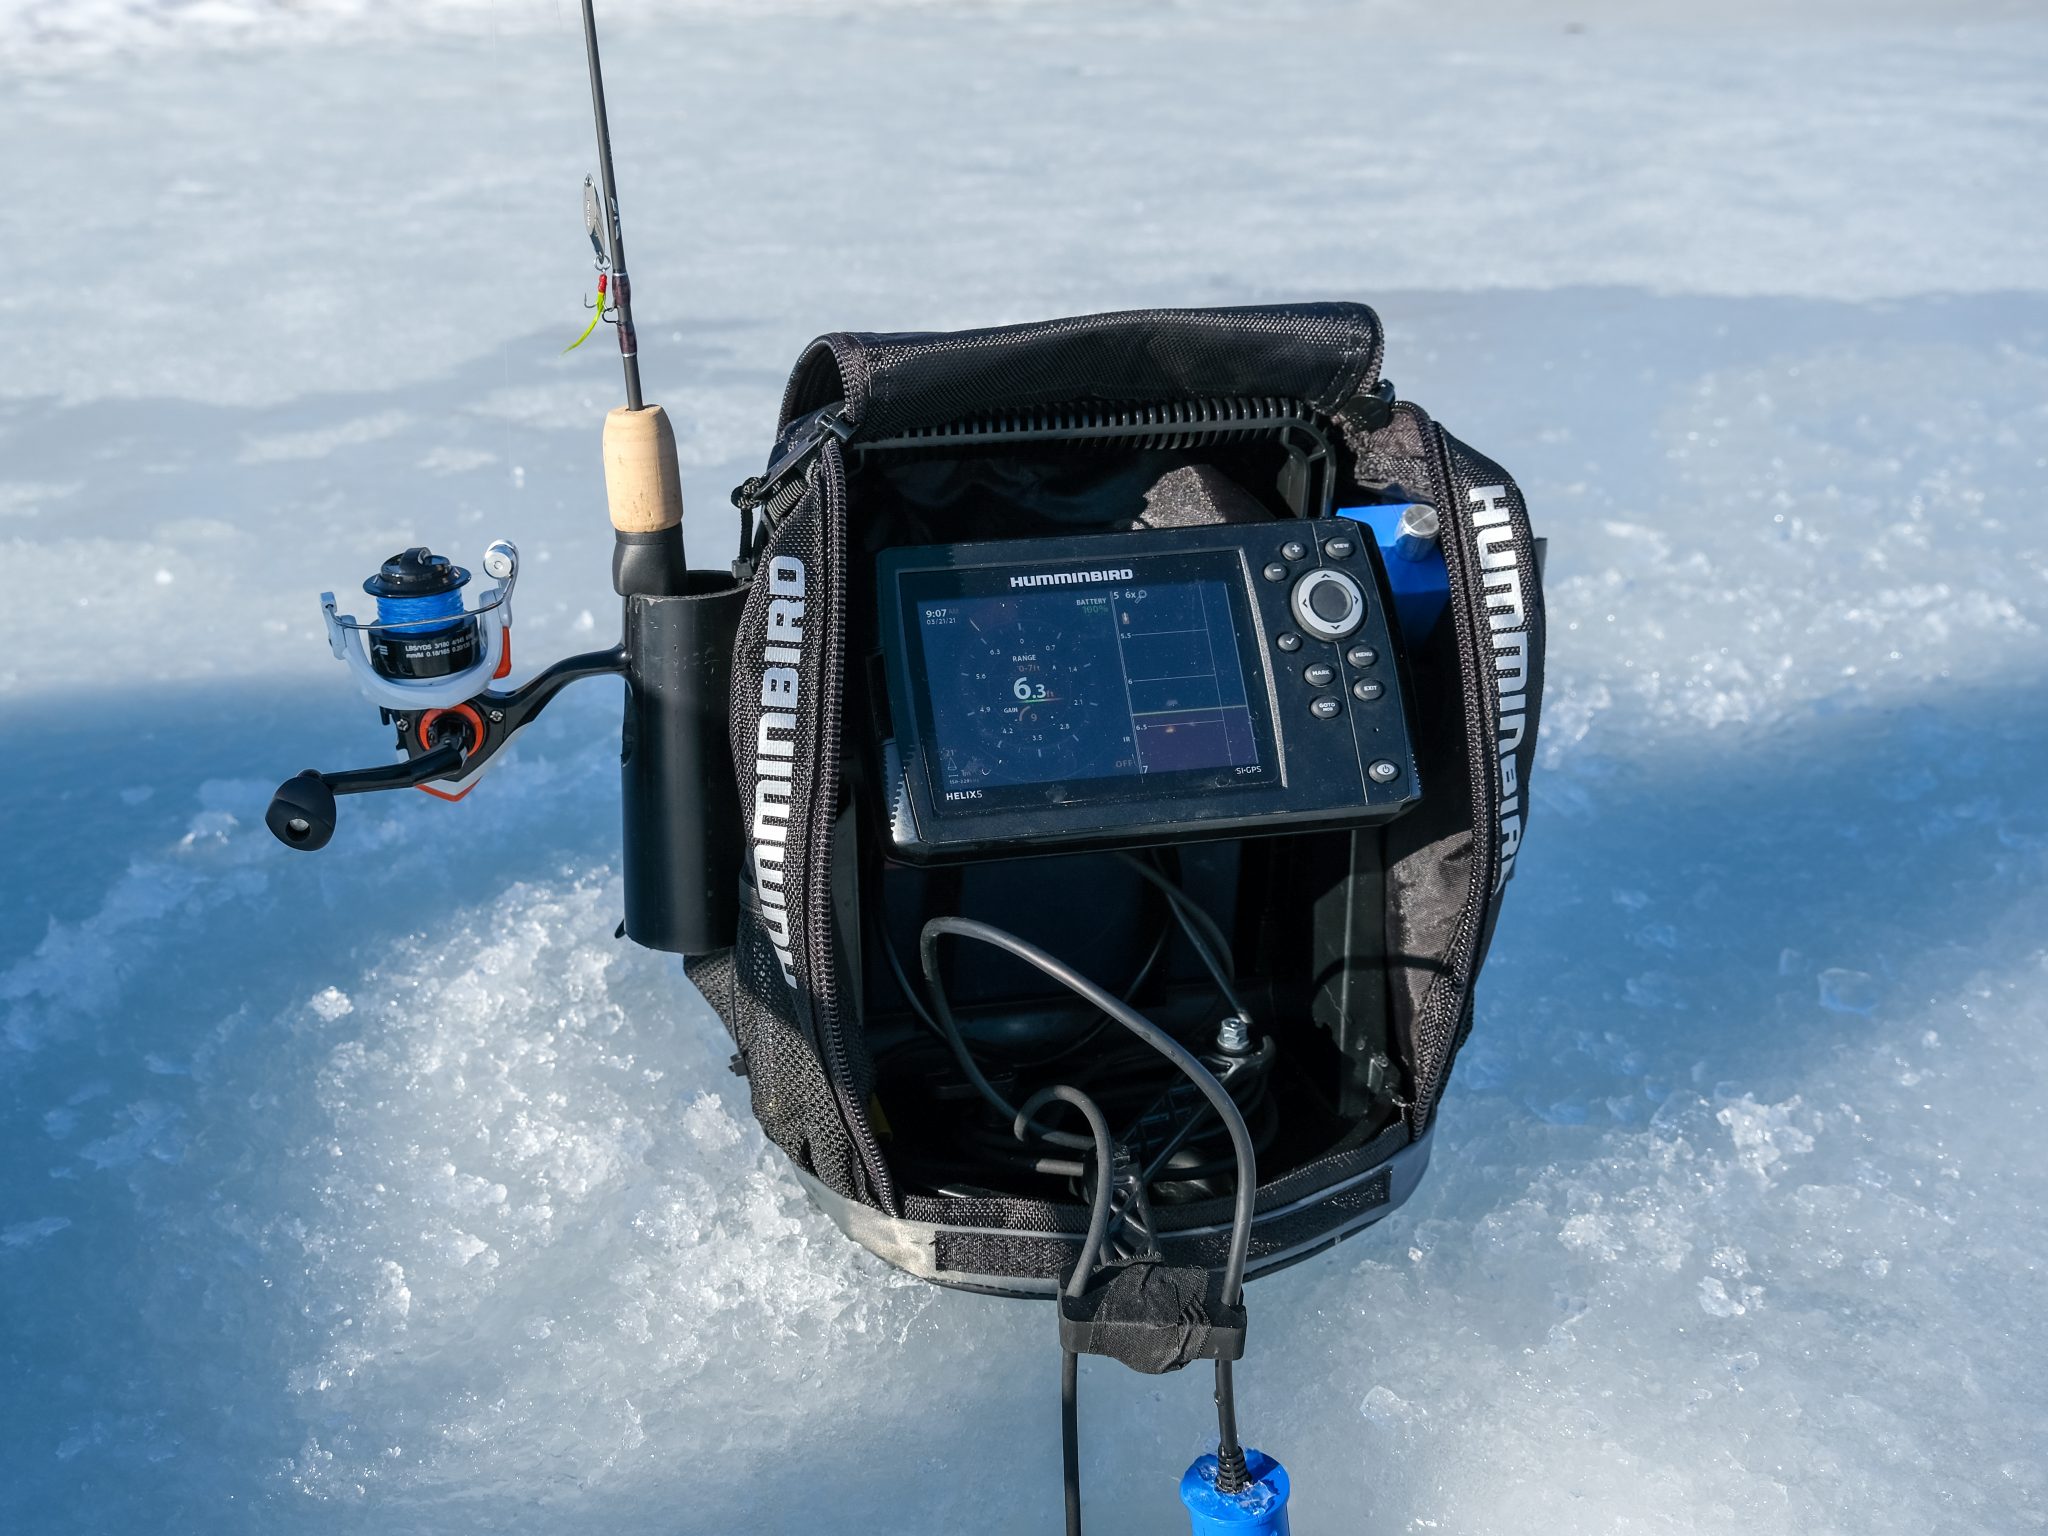 Let's see your DIY Helix Shuttle!!! - Ice Fishing Forum - Ice